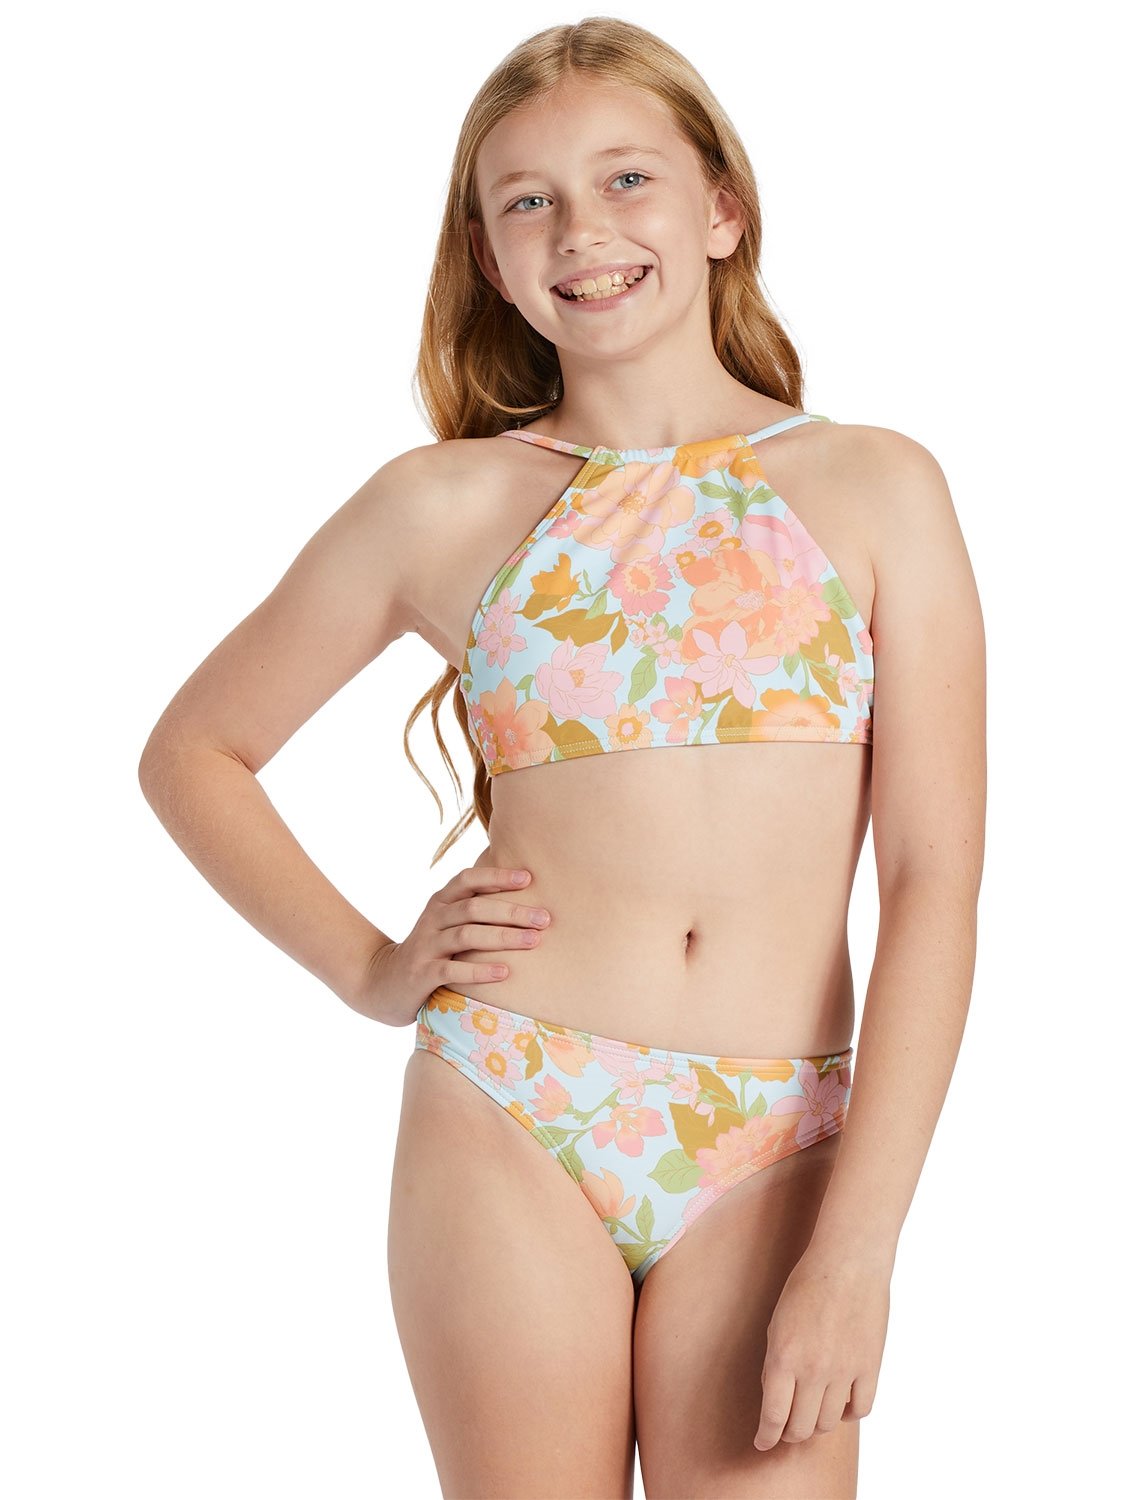 Girls Rompers Size 14-16 Ladies Two Piece Swimsuits for Older